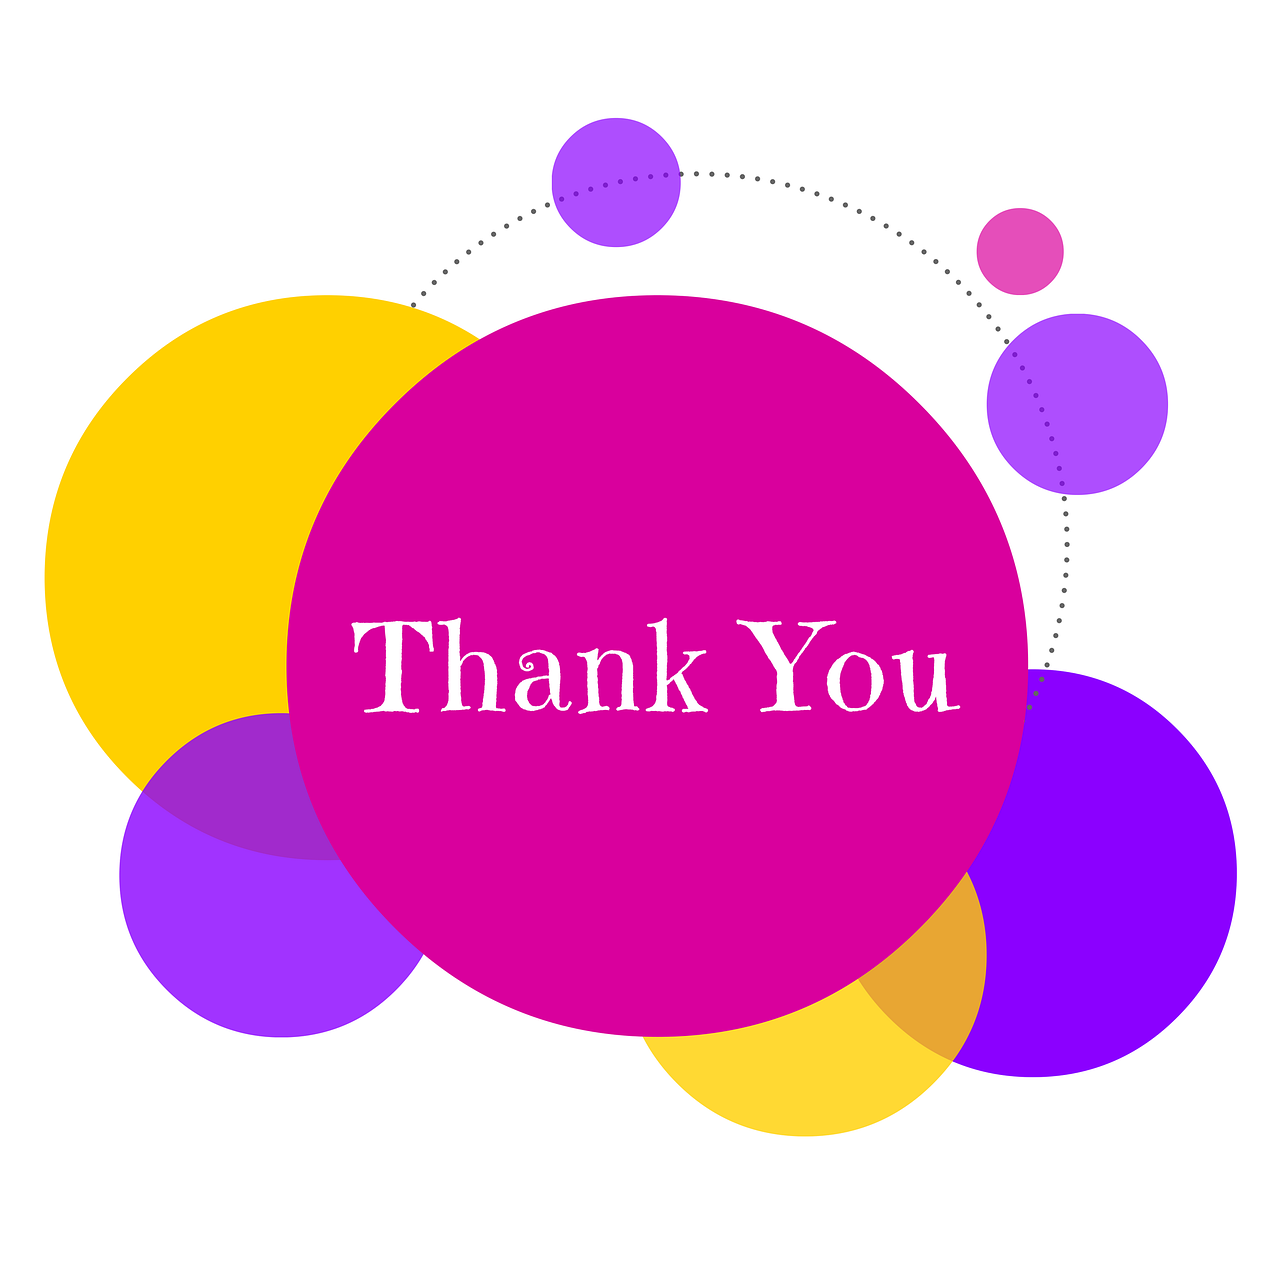 Thank you text written on a graphic bubble